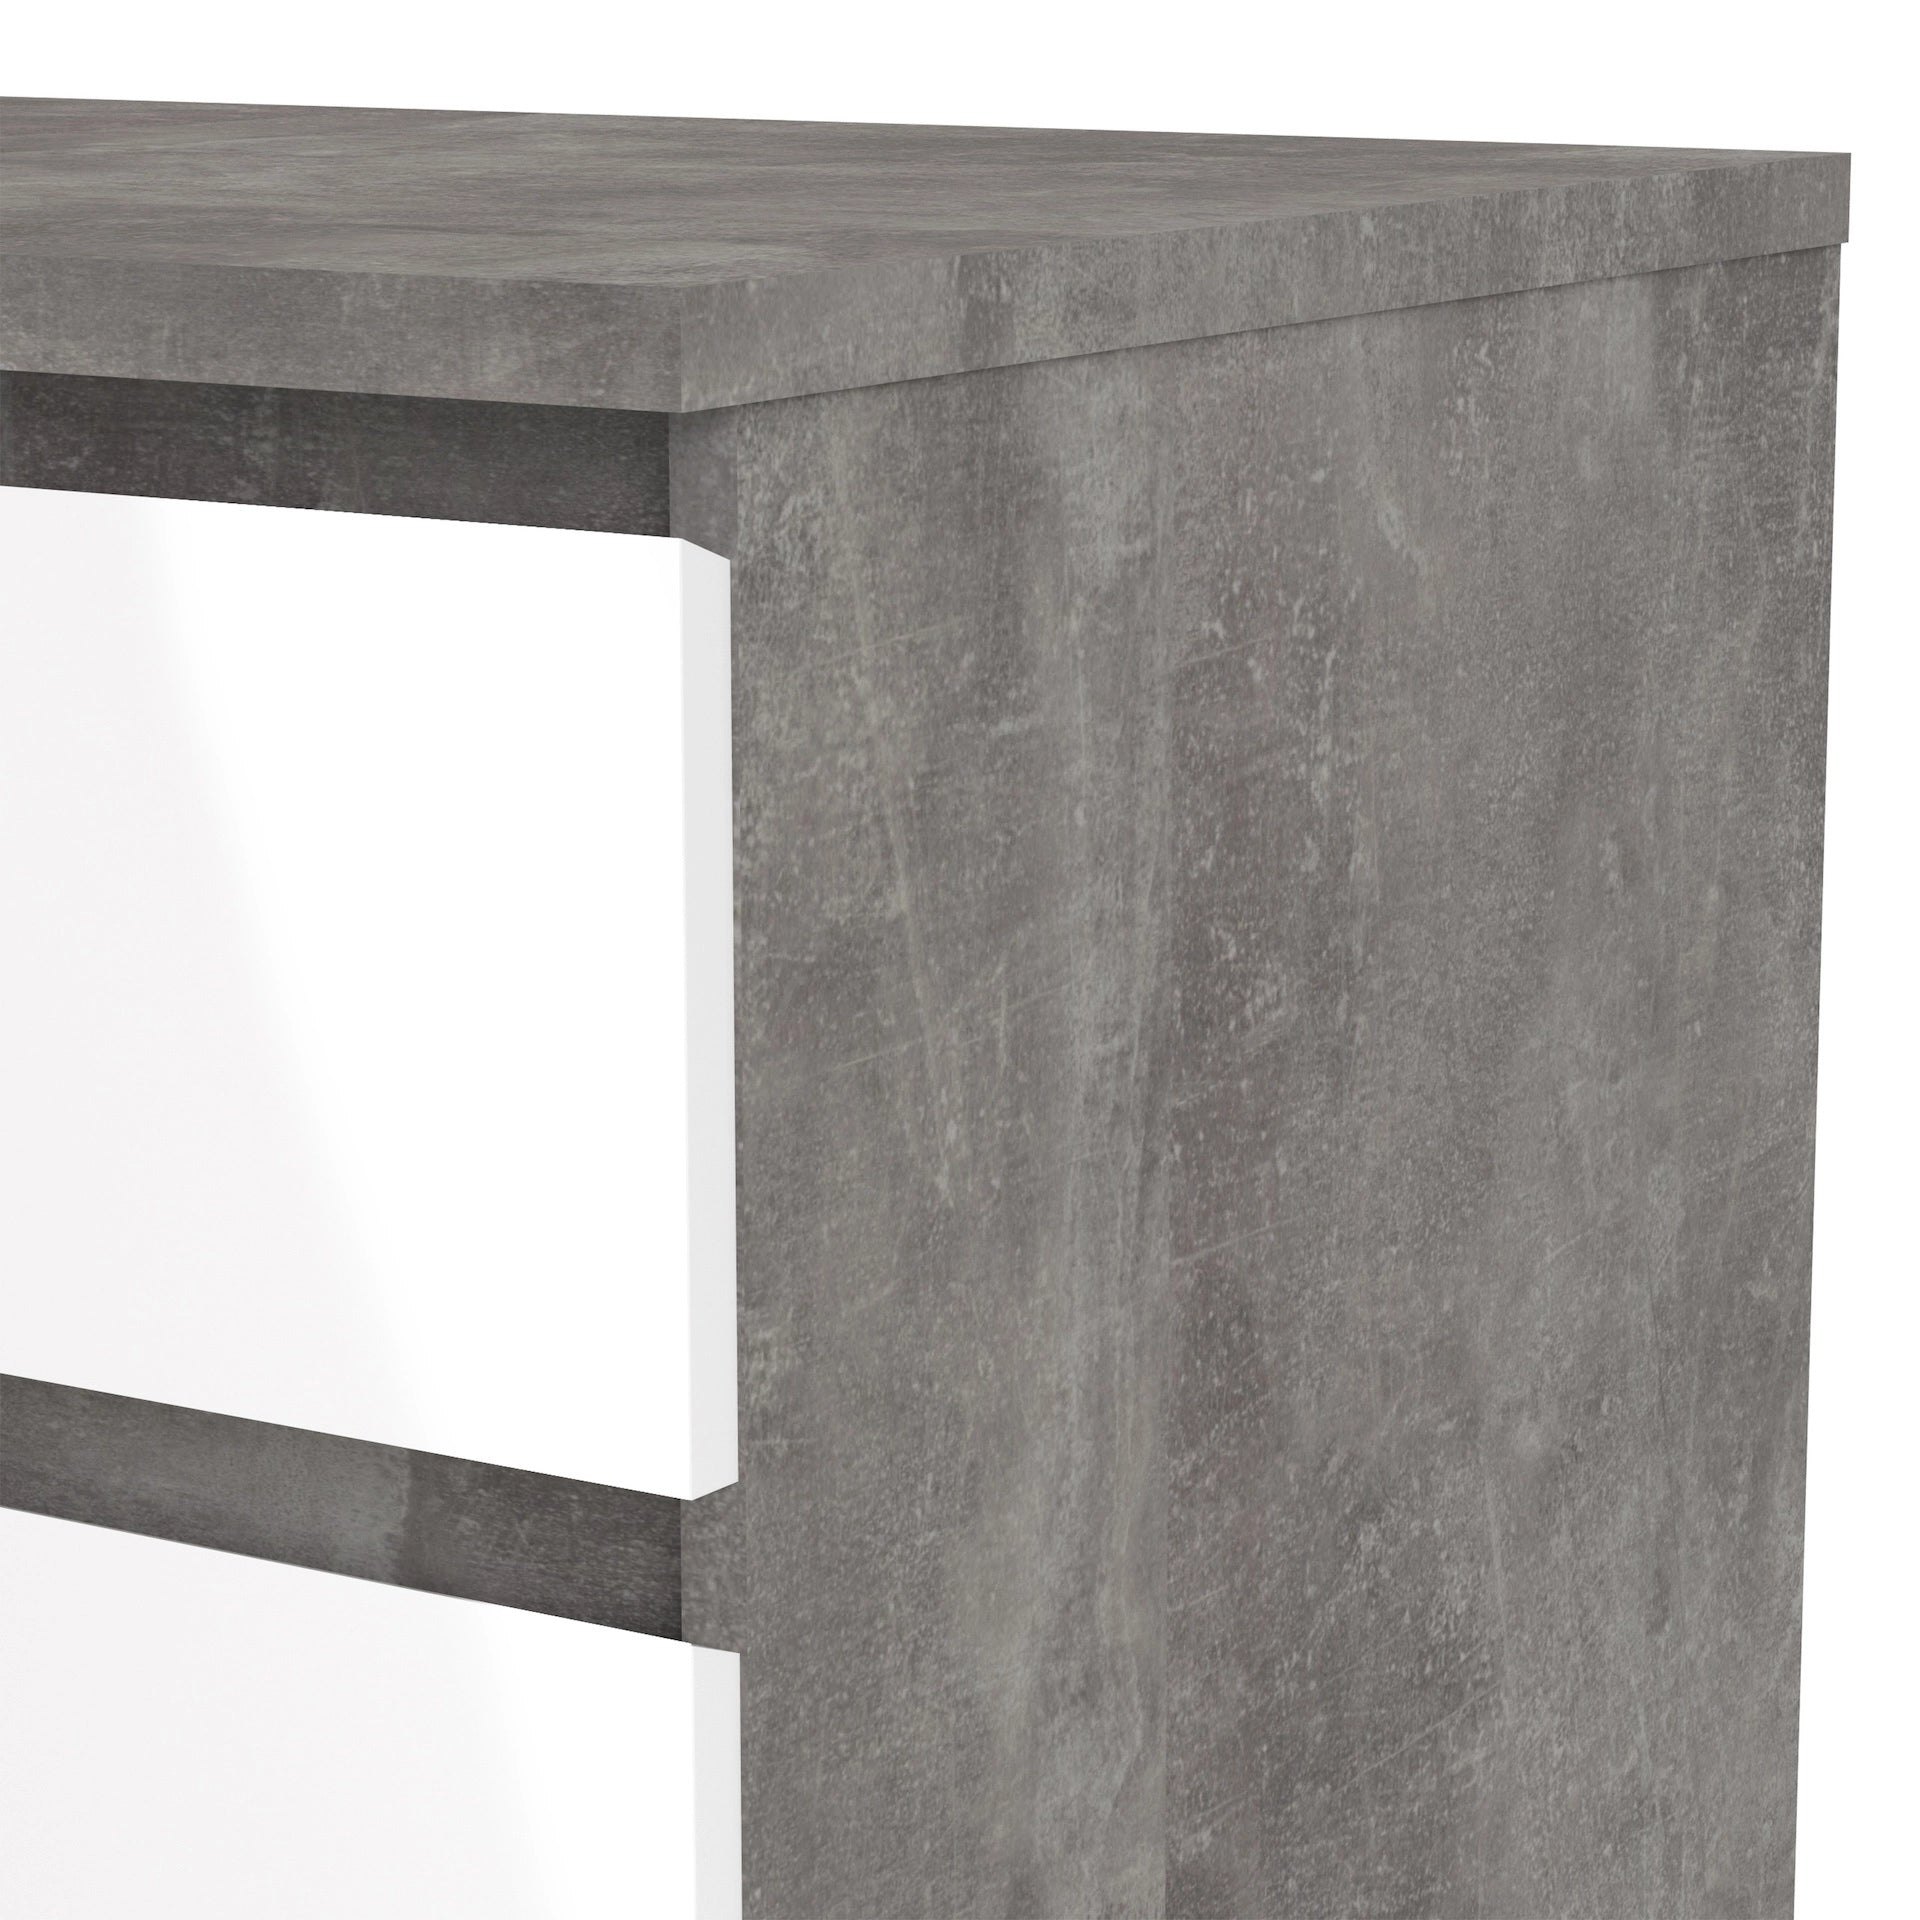 Furniture To Go Naia Chest of 5 Drawers in Concrete & White High Gloss